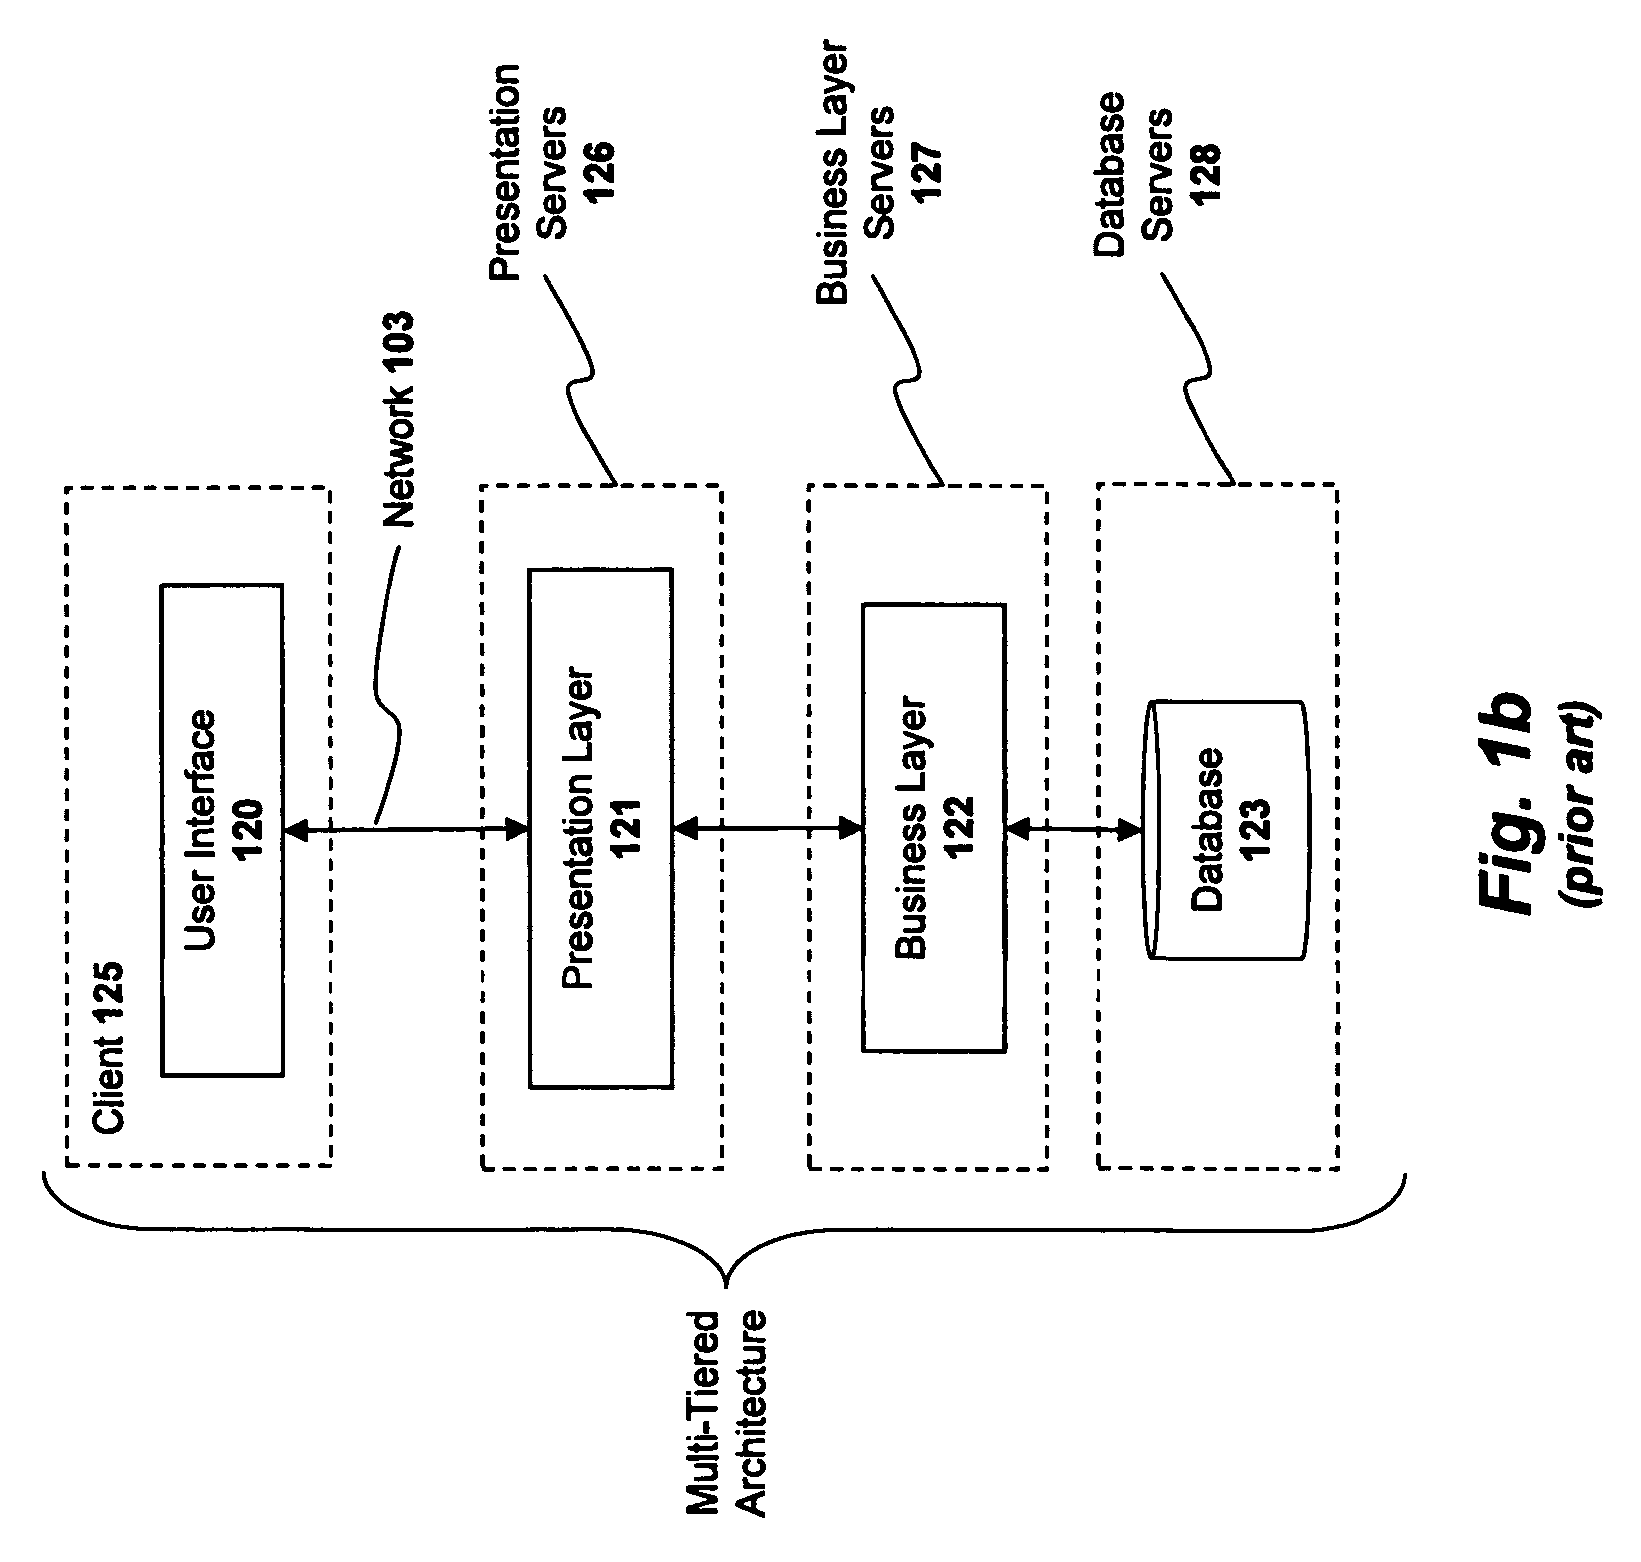 Graphical user interface system and method for presenting information related to session and cache objects